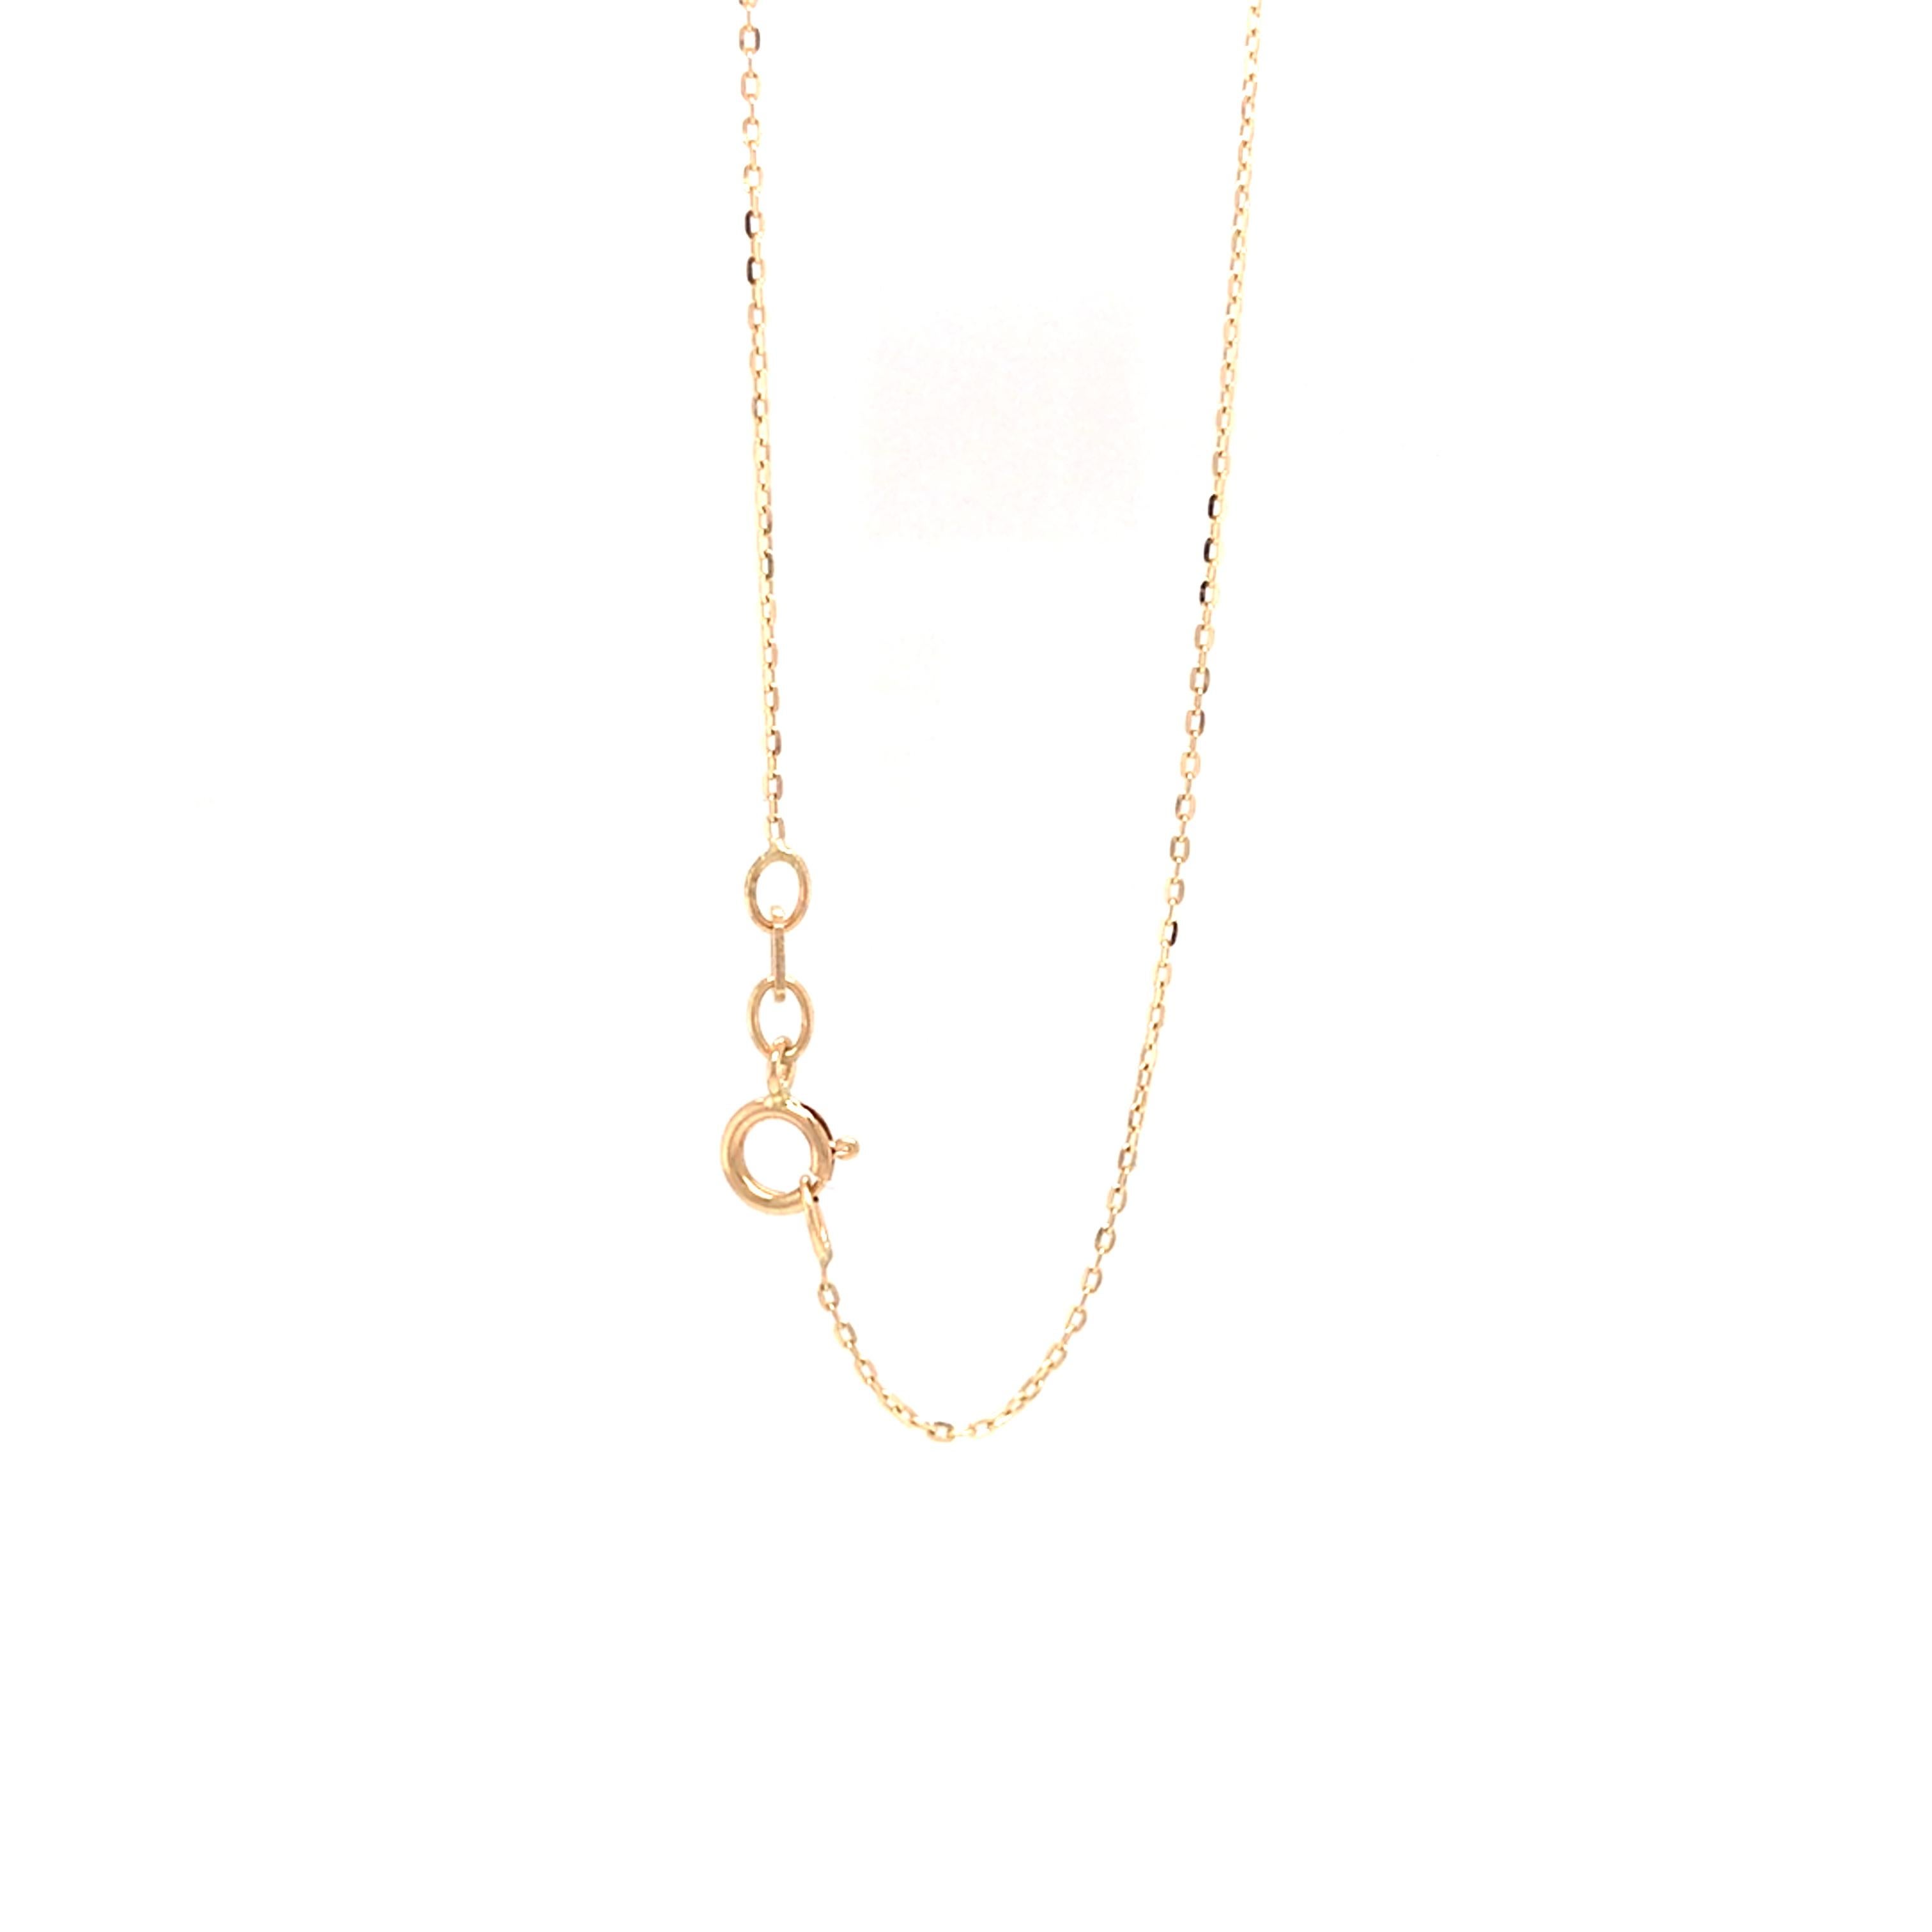 Round Cut Diamond Letter 'A' Pendant Necklace in 14K Yellow Gold